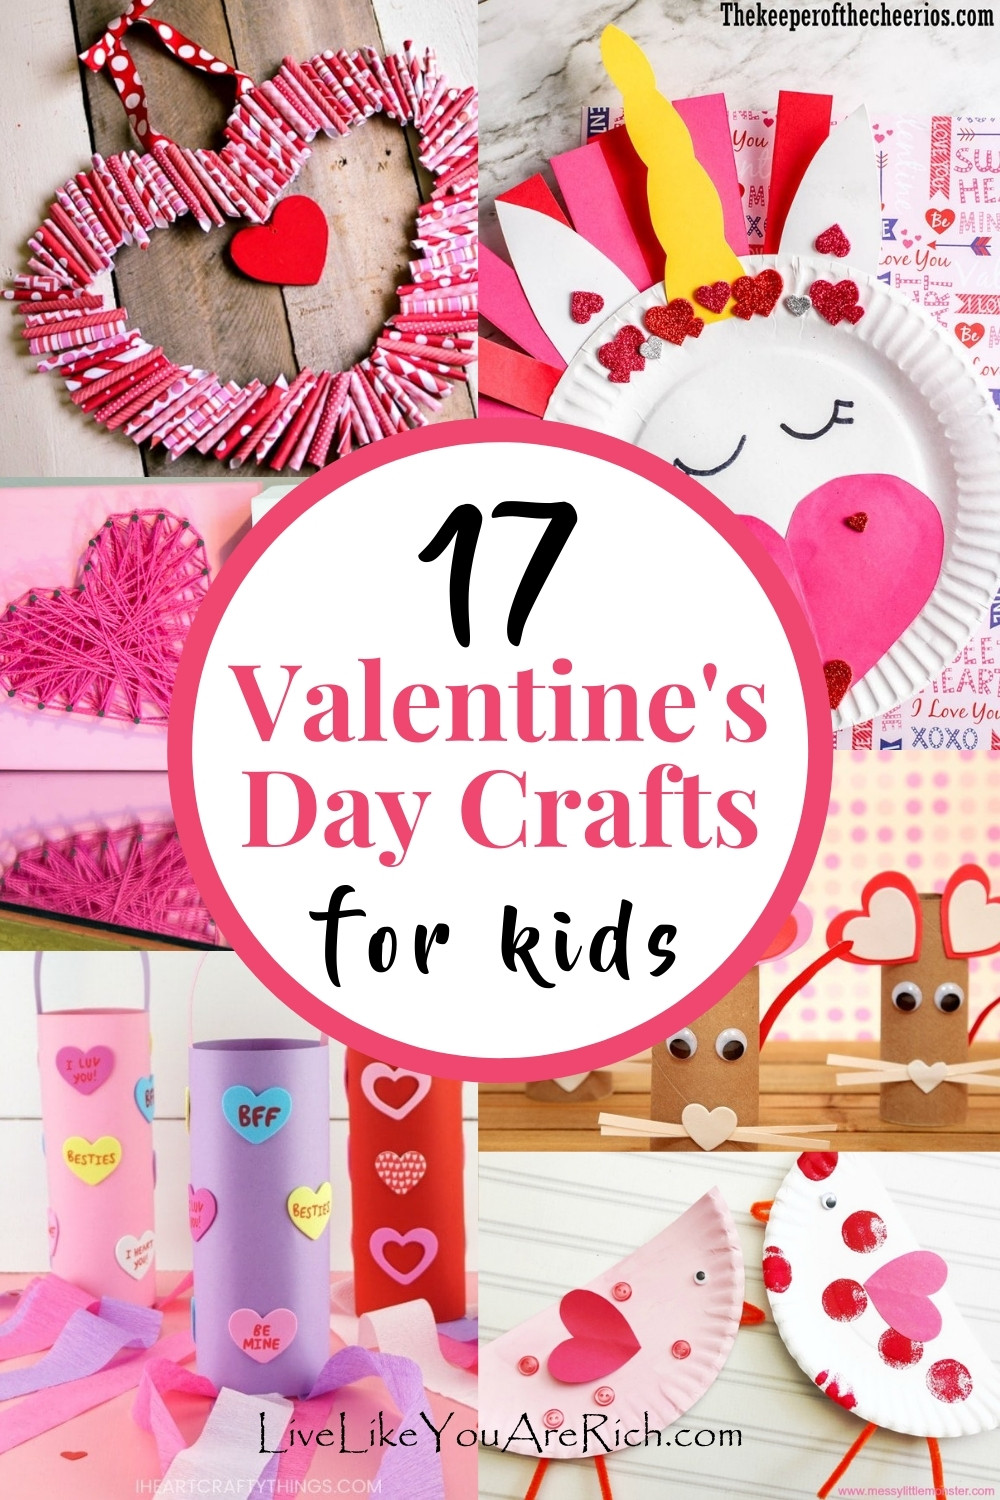 17 Valentine's Day Crafts for Kids - Fun and Inexpensive